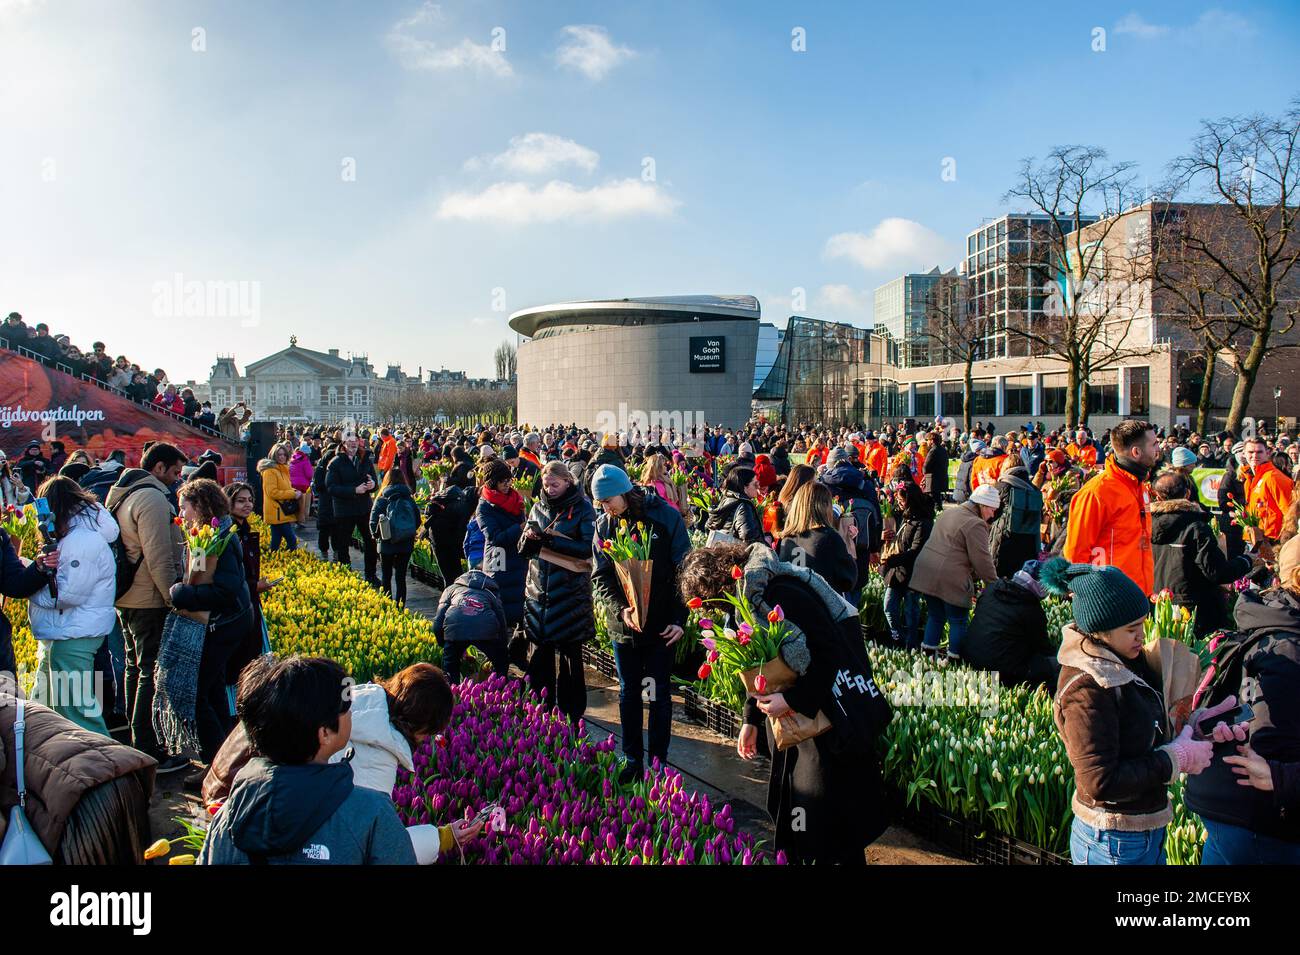 People are seen taking bunches of tulips for free. Each year on the 3rd Saturday of January, the National Tulip Day is celebrated in Amsterdam. Dutch tulip growers built a huge picking garden with more than 200,000 colorful tulips at the Museumplein in Amsterdam. Visitors are allowed to pick tulips for free. The event was opened by Olympic skating champion, Irene Schouten. Prior to the opening, she christened a new tulip: Tulipa 'Dutch Pearl' as a reference to the world - famous painting 'The girl with a pearl earring' by Johannes Vermeer. (Photo by Ana Fernandez/SOPA Images/Sipa USA) Stock Photo